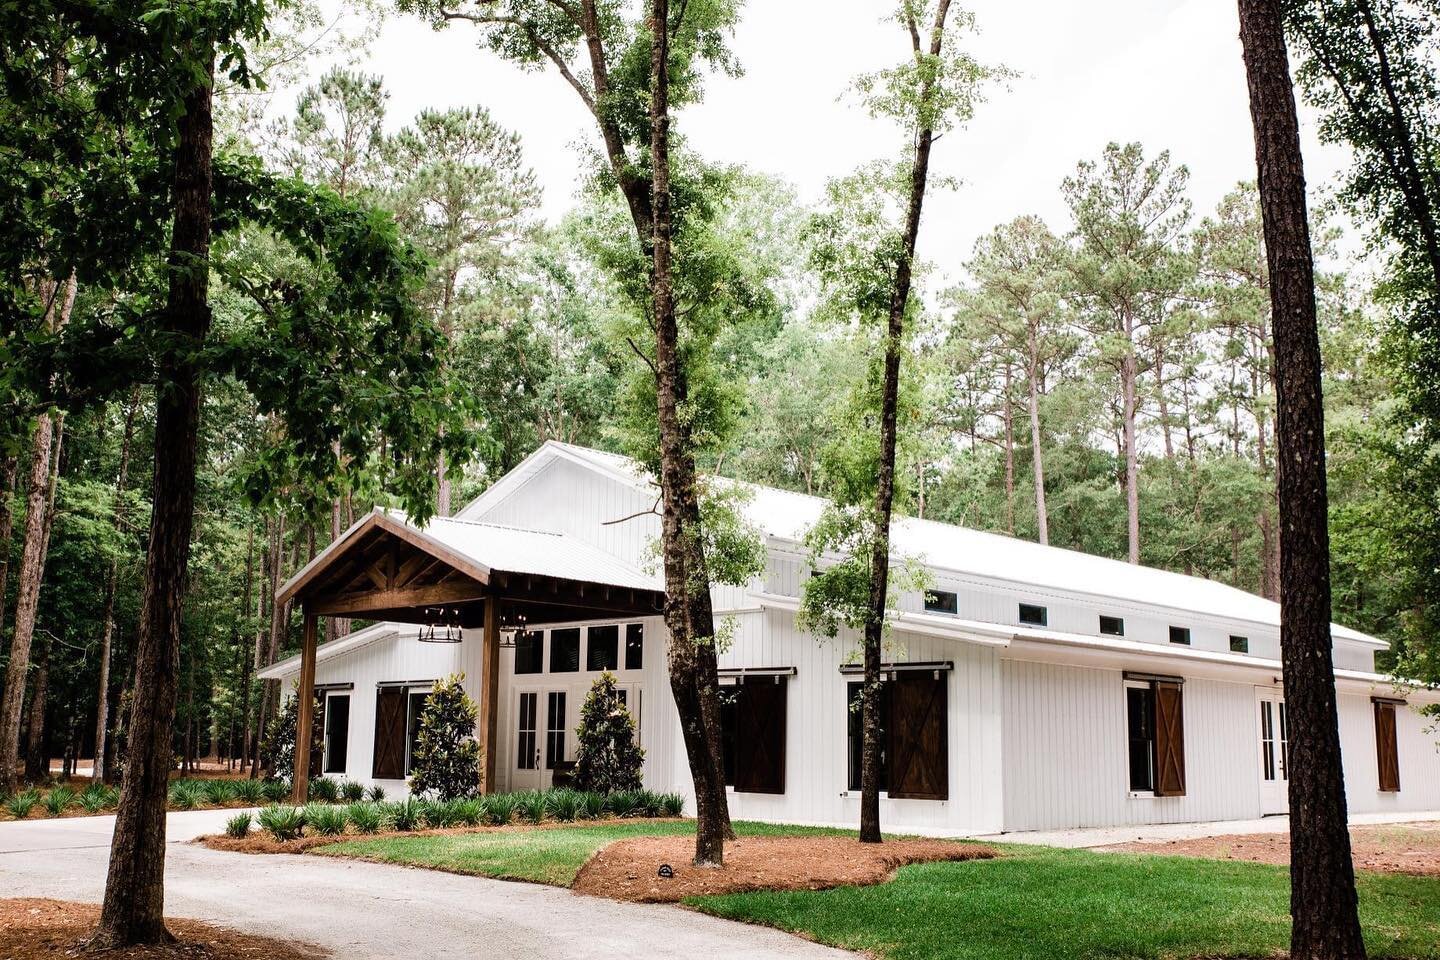 Don't Forget!! Dinner Under the Pines will be on August 7th from 4-8 pm! 🌲🍴 

Live music, savory &amp; sweet food trucks, wine tasting, outdoor games &amp; more. See you then! ✨ ✨

📸: Southern Tide Photography LLC 
.
.
.

#pinelandplace #wedding #